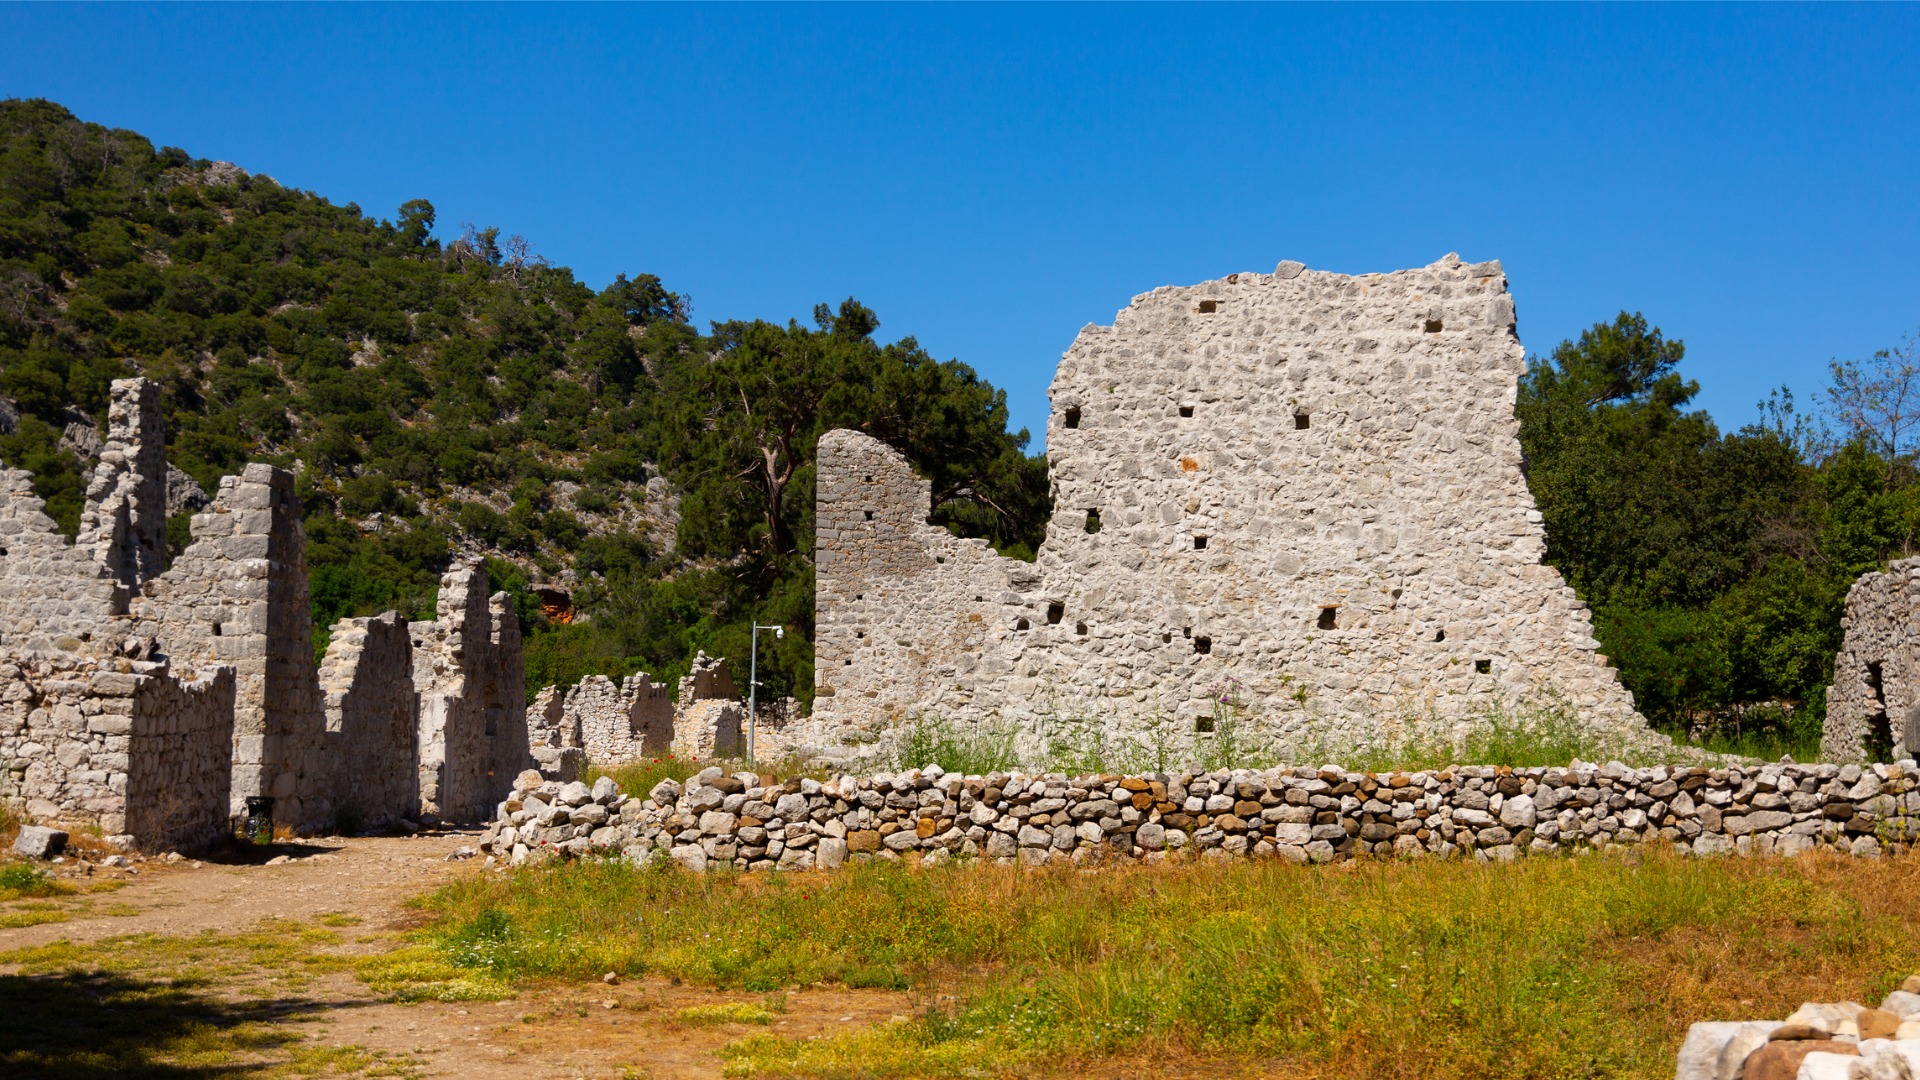 This image shows the remains of ancient buildings in Olympos Turkey.